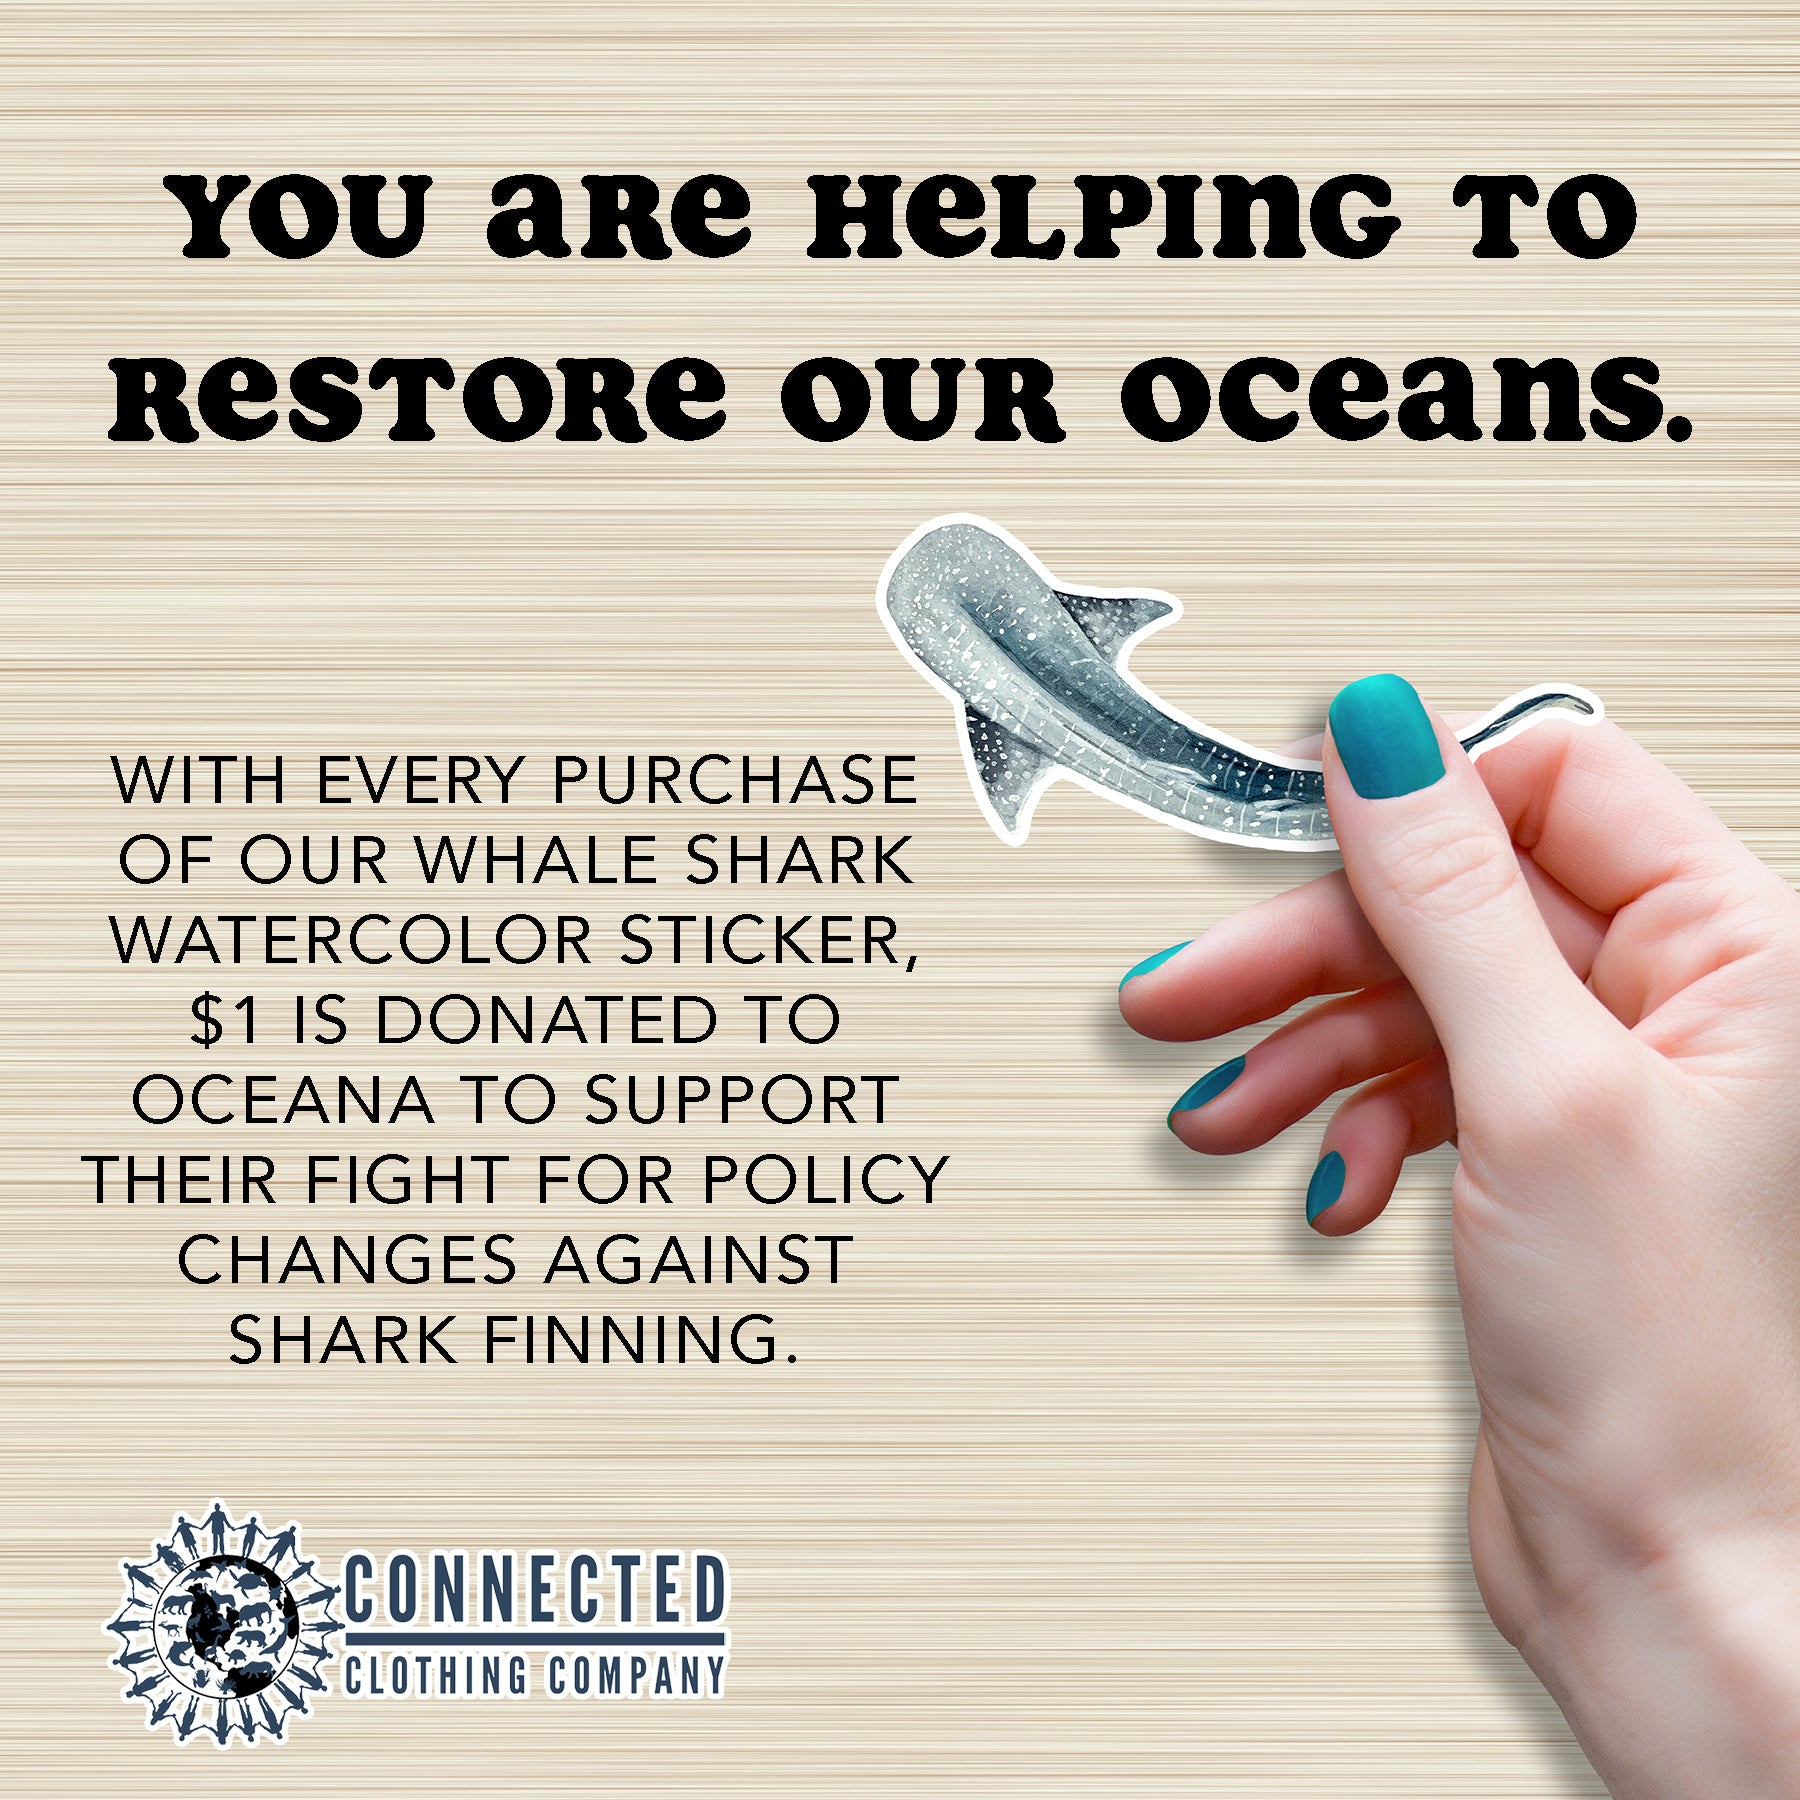 Hand Holding Whale Shark Watercolor Sticker - "You are helping to restore our oceans. With every purchase of our whale shark watercolor sticker, $1 is donated to oceana to support their fight for policy changes against shark finning." - sweetsherriloudesigns - Ethical and Sustainable Apparel - portion of profits donated to shark conservation